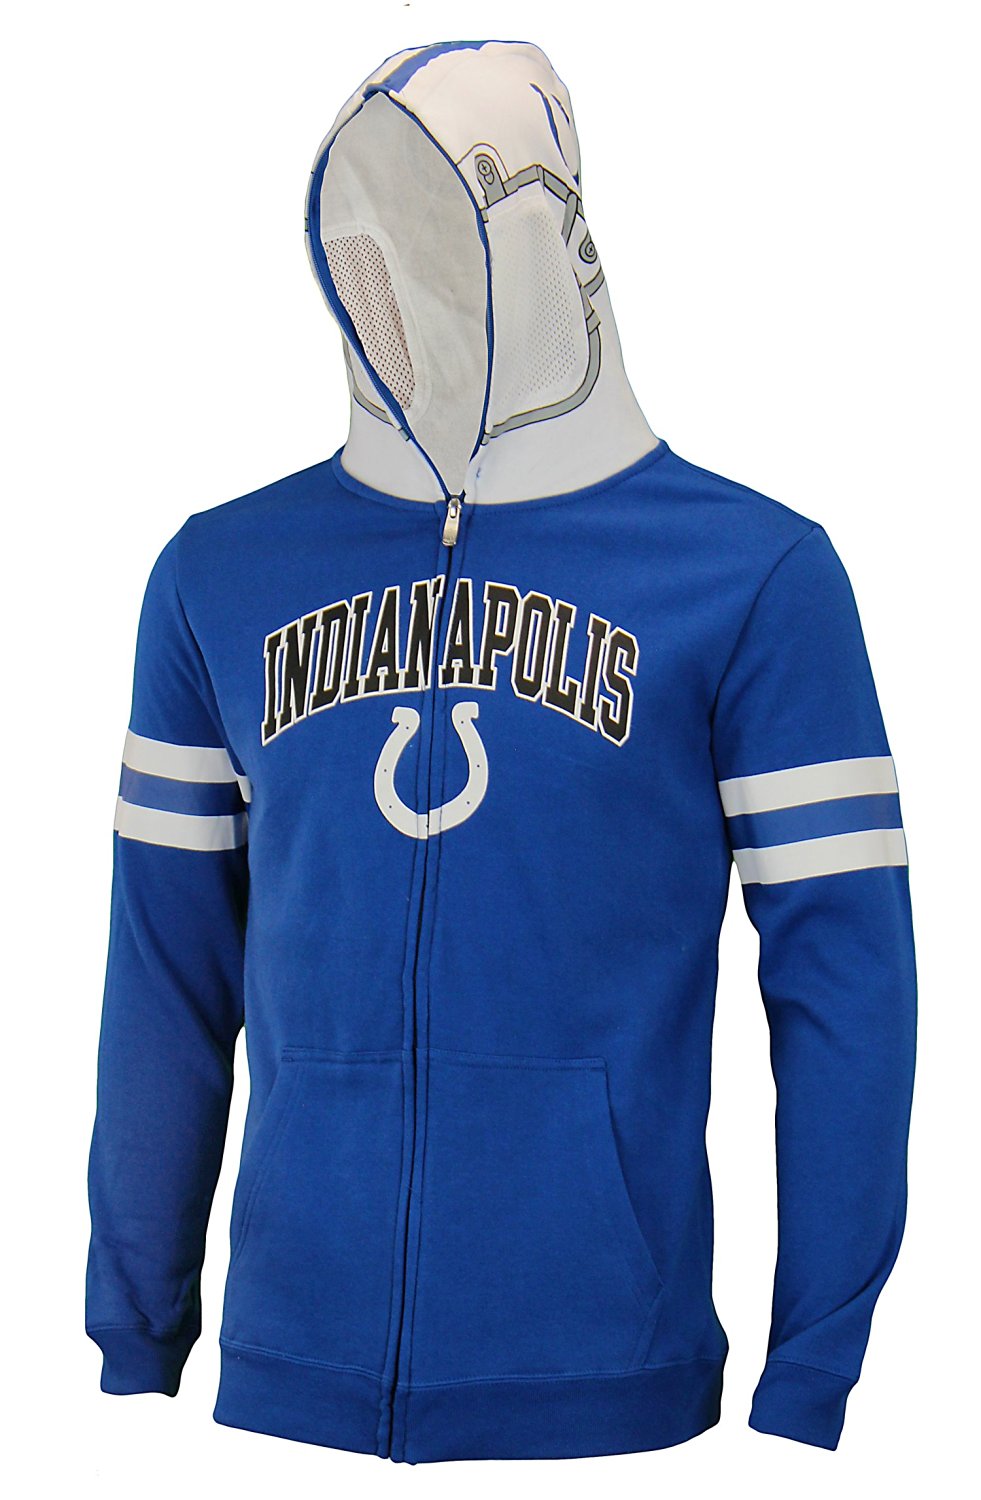 NFL Youth Indianapolis Colts Full Zip 